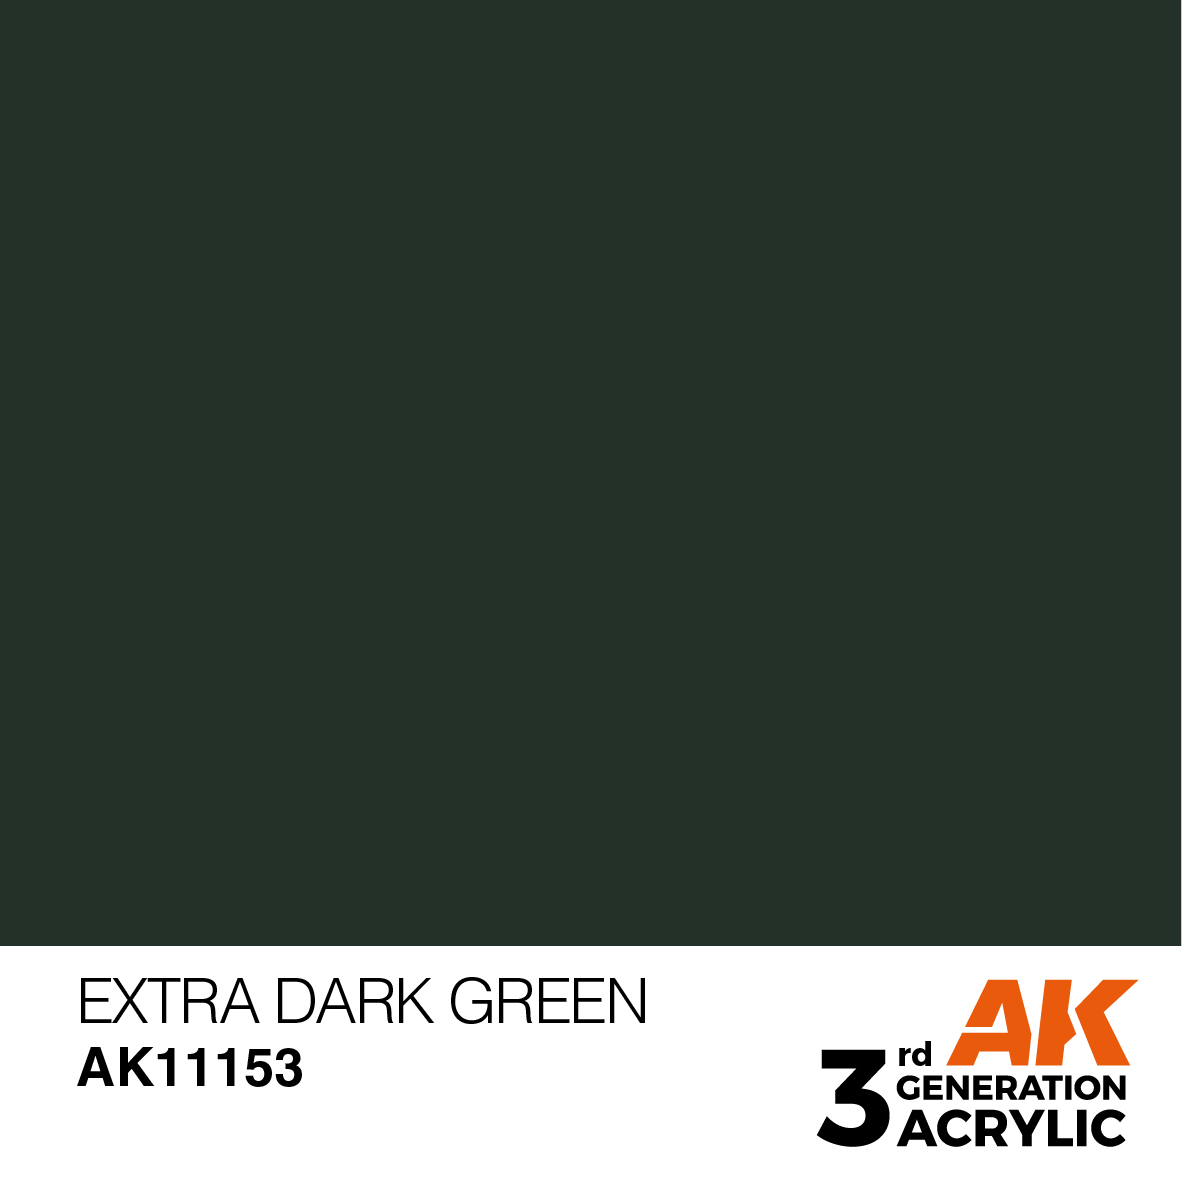 Dark Green Color Codes The Hex, RGB And CMYK Values That You Need | vlr ...